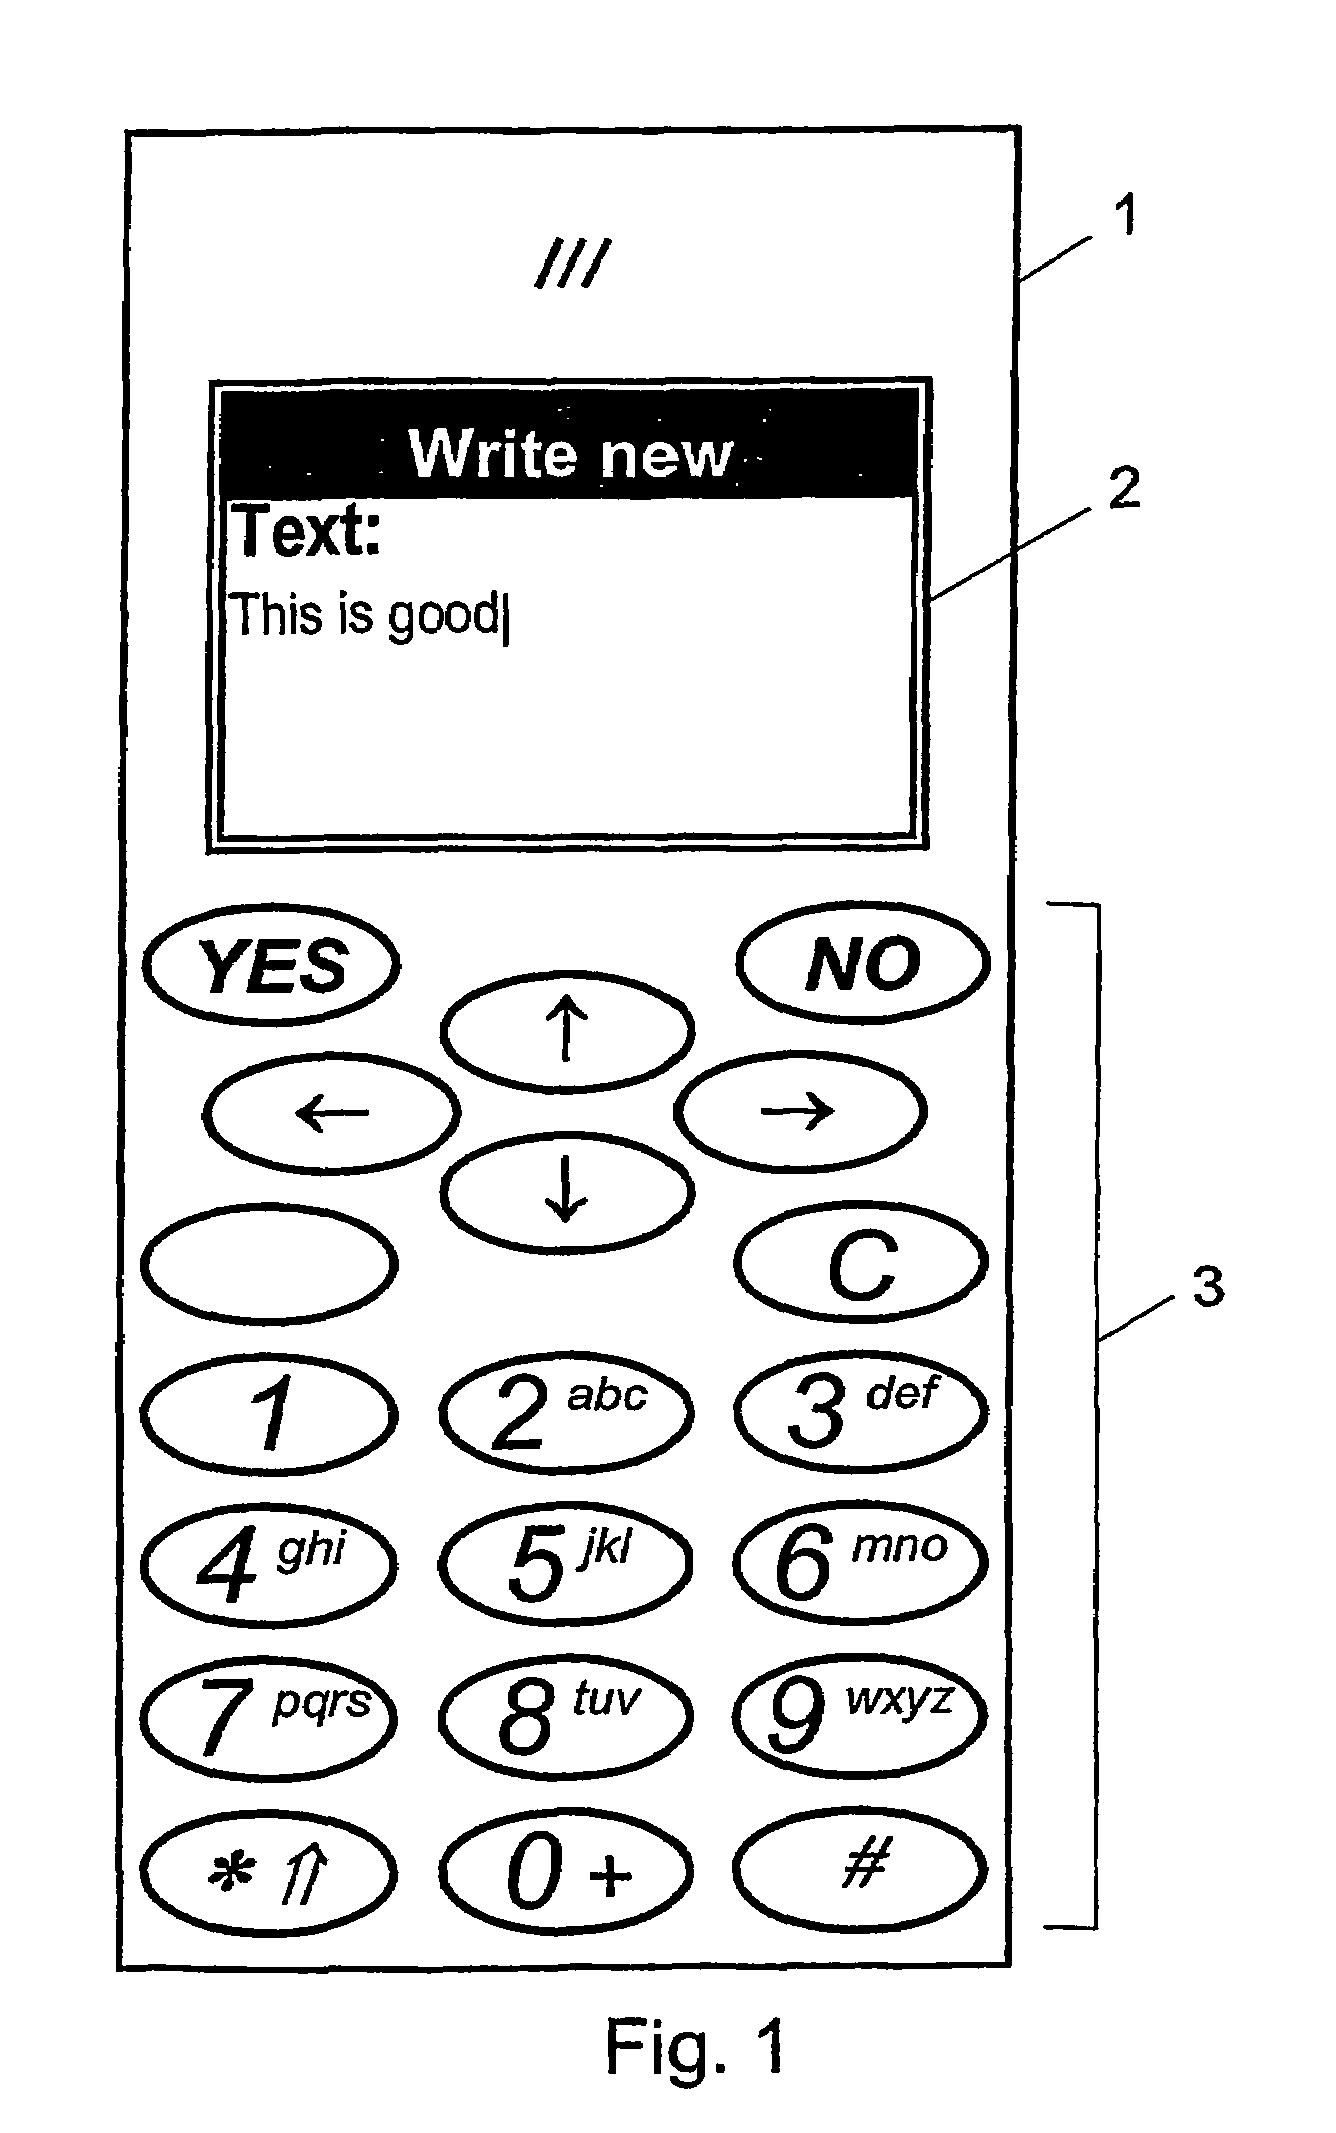 Entering text into an electronic communications device